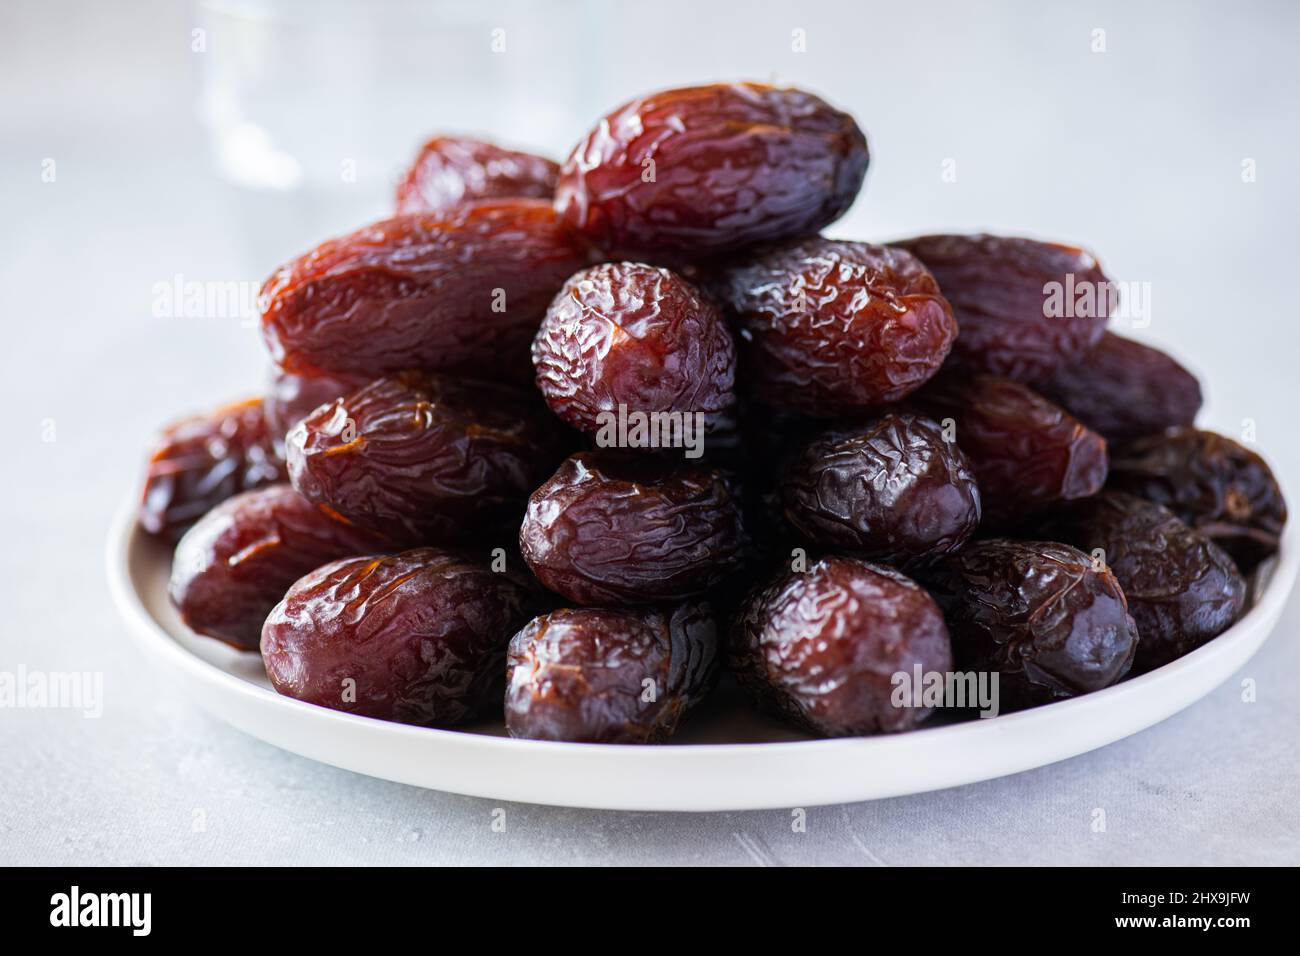 Close up of Medjoul dates in a white plate on a gray background. Stock Photo